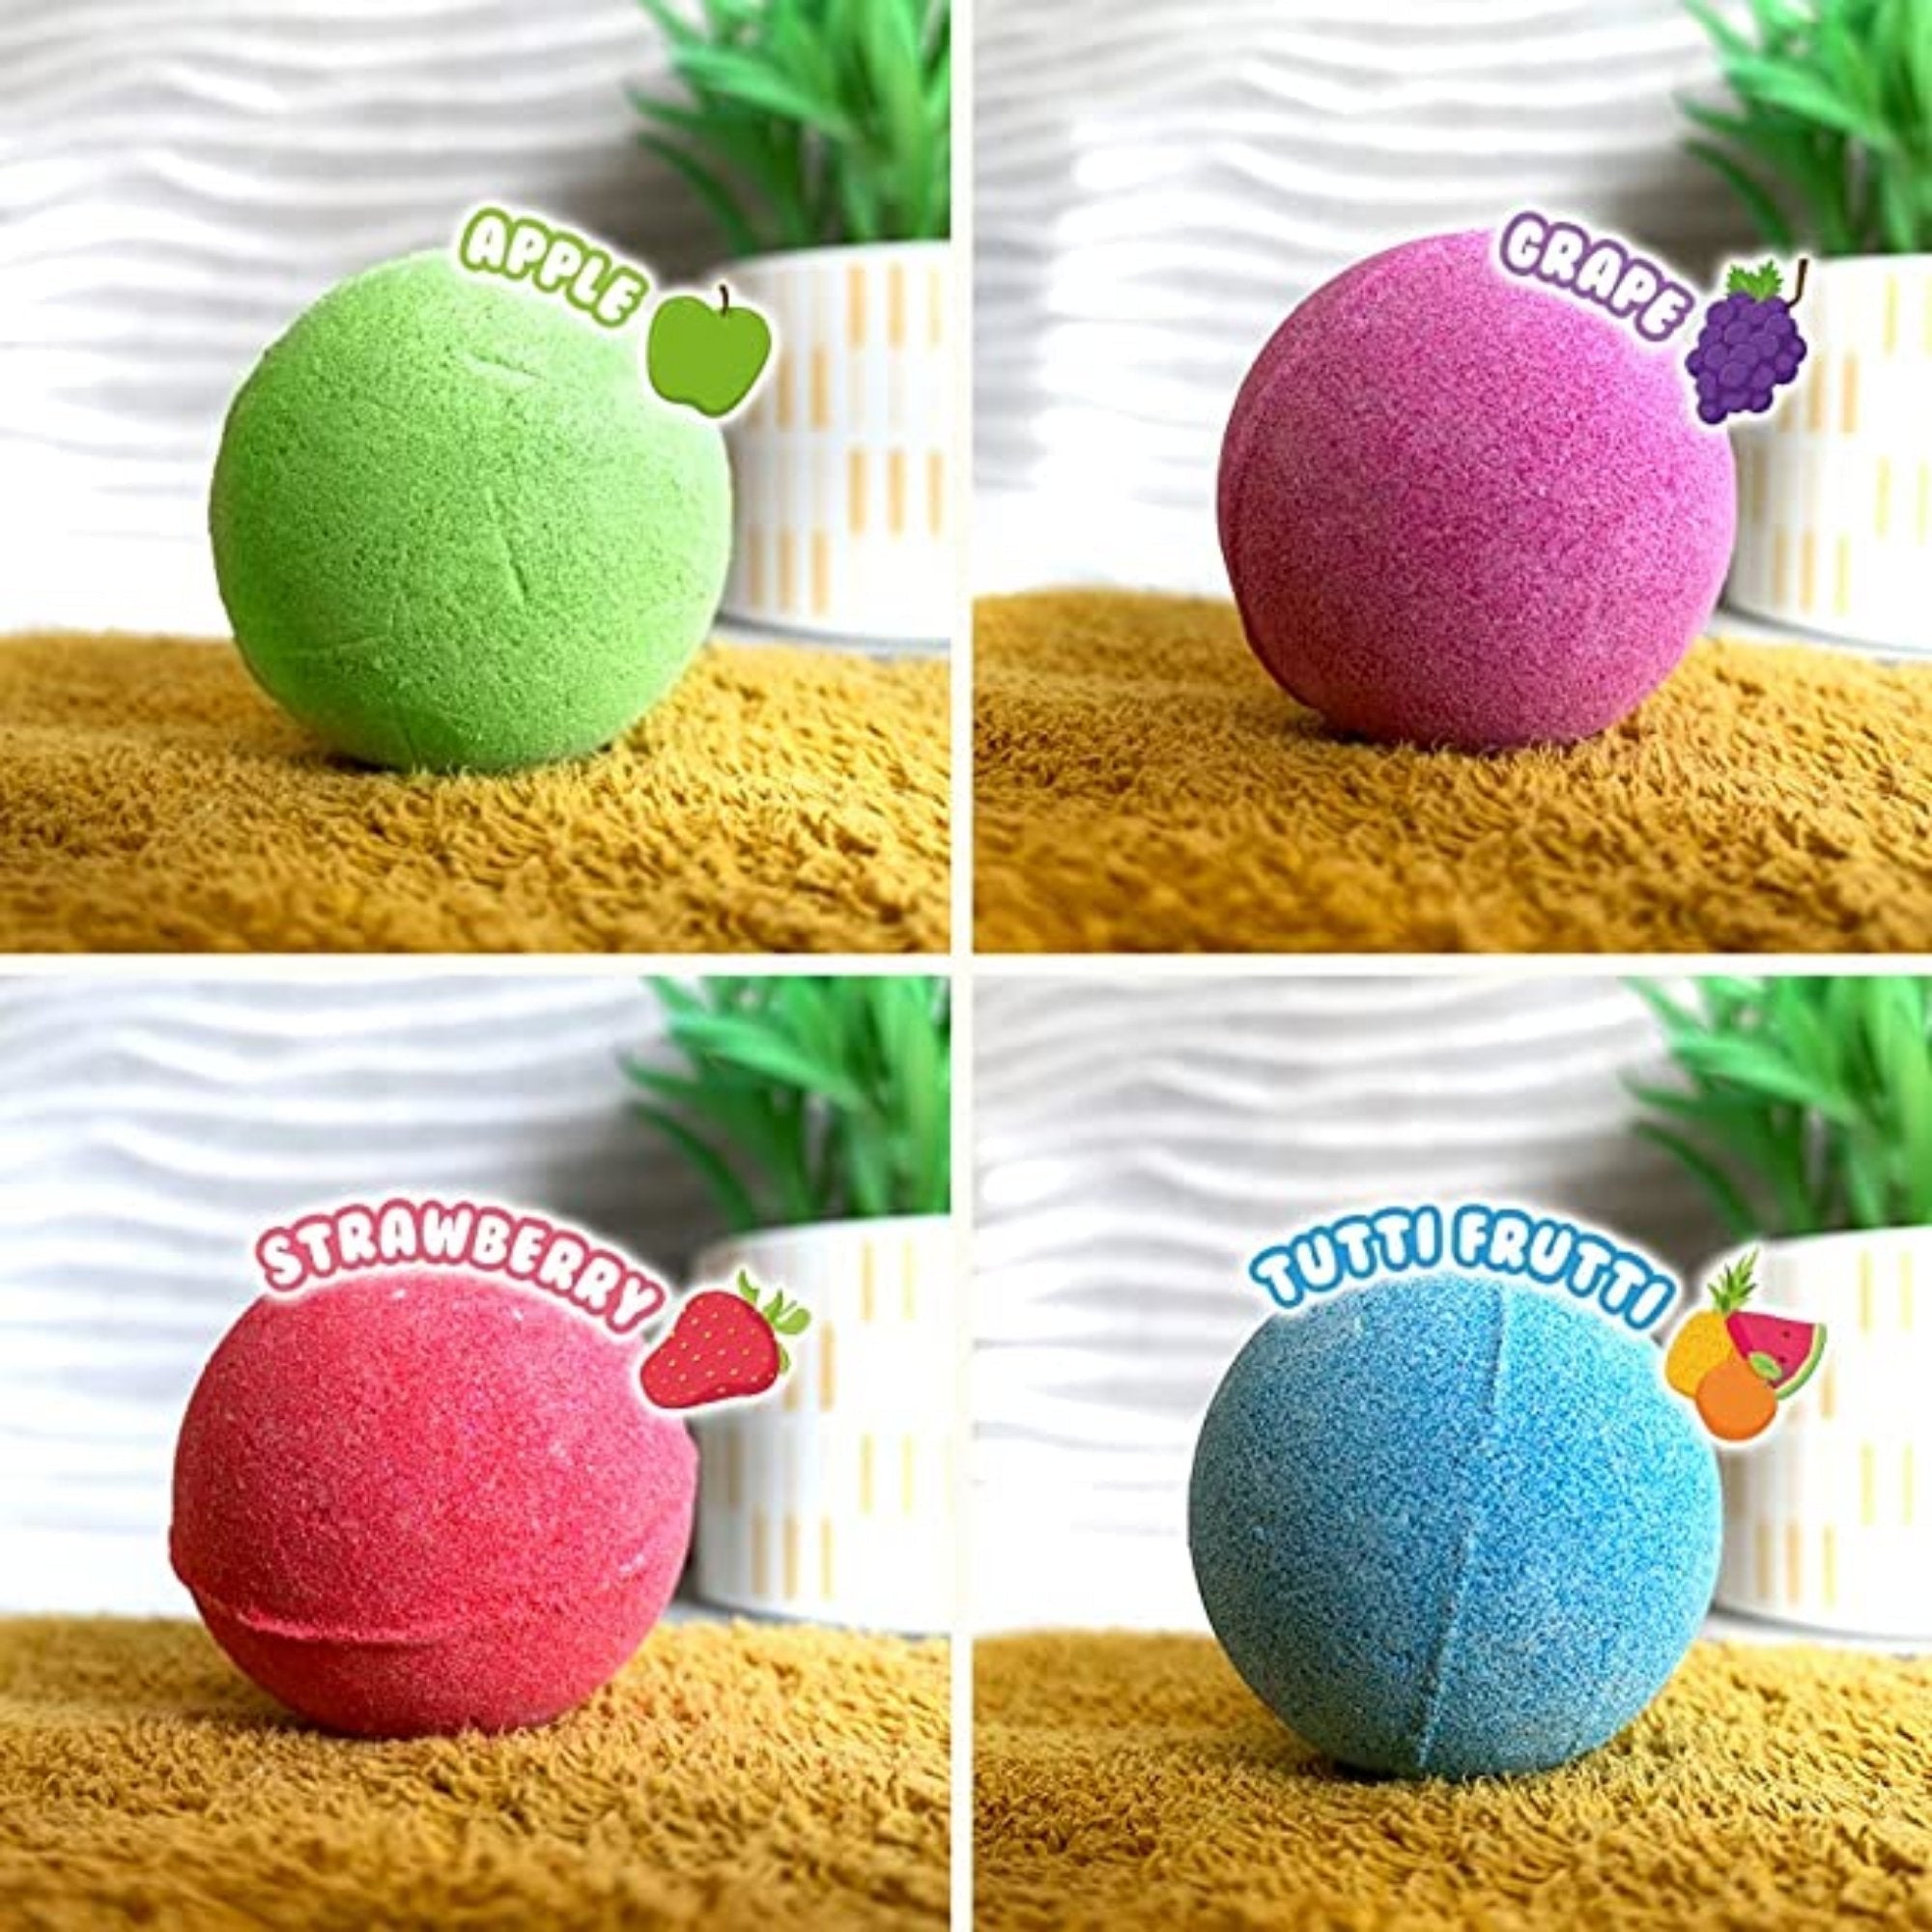 Baff Bombz 4 Pack, You might think bath bombs are strictly for adults, all of that will change as soon as you get your hands on the Baff Bombz 4 Pack . Create an exciting bath time adventure for your little ones with one of the deliciously scented bombs, you can choose from apple, grape, strawberry and tutti frutti. Give them the chance to indulge in 100% safe bath time fun, the bath bombs are skin and drain safe, easy to clean and stain free. Just drop your choice of Baff Bomb into a warm bath and watch th